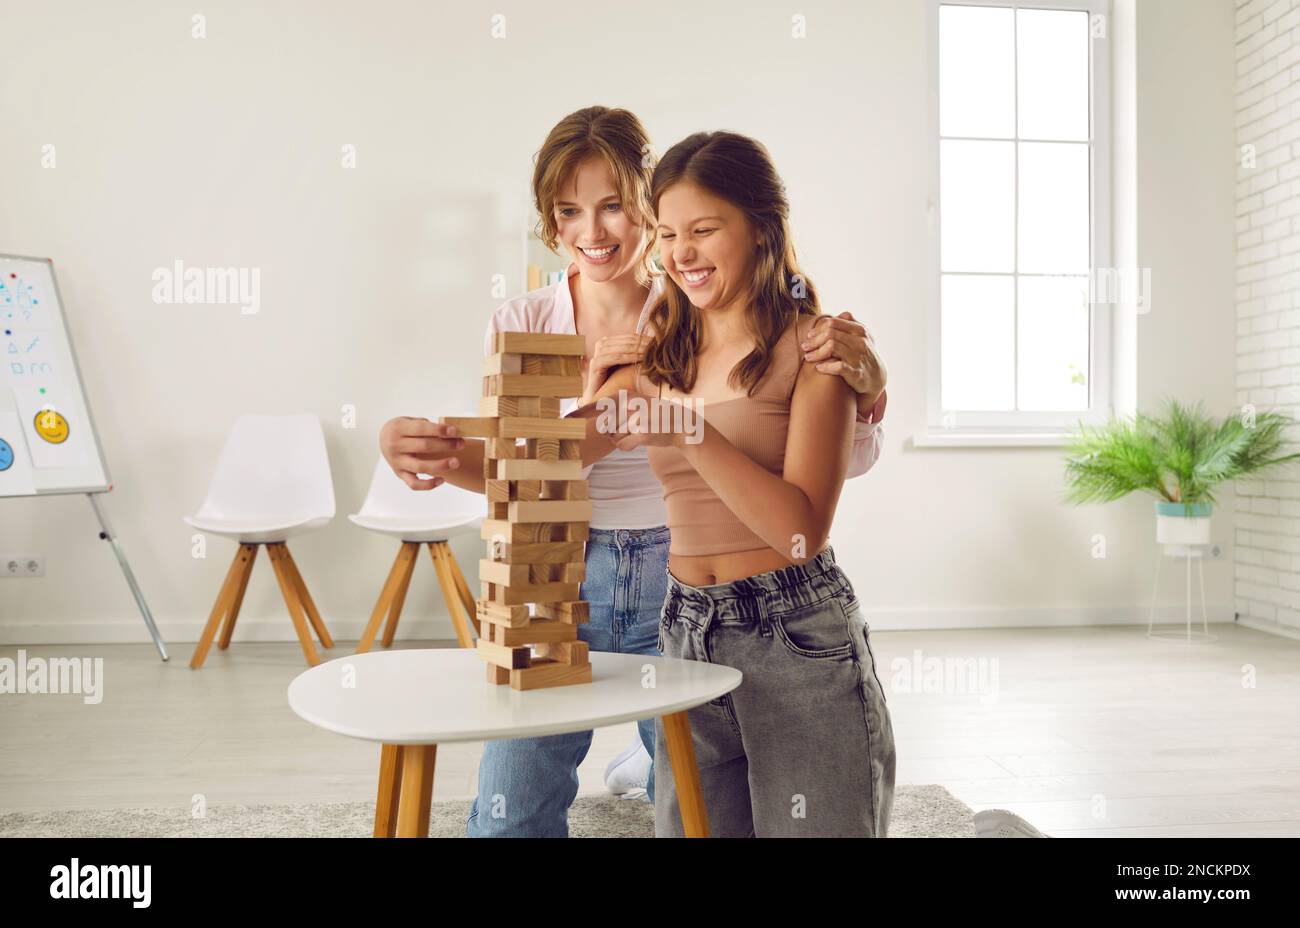 Laughing woman psychologist is playing tumbling tower with teen girl on therapy session. Stock Photo